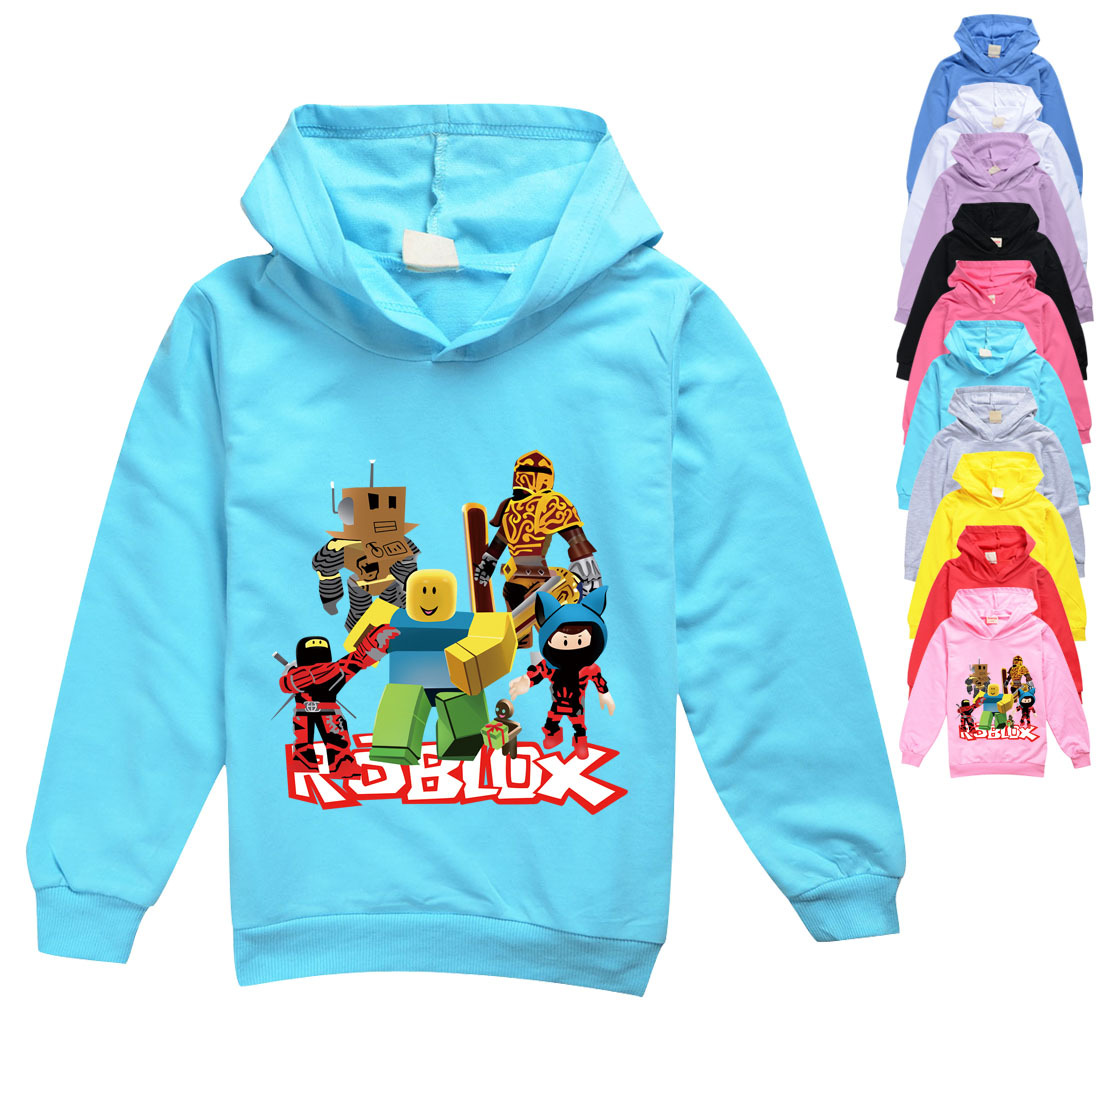 Roblox Children S Sweater Spring And Autumn Long Sleeved Suit Hoodie Roblox Boys And Girls Sweater Shopee Singapore - light purple hoodie roblox